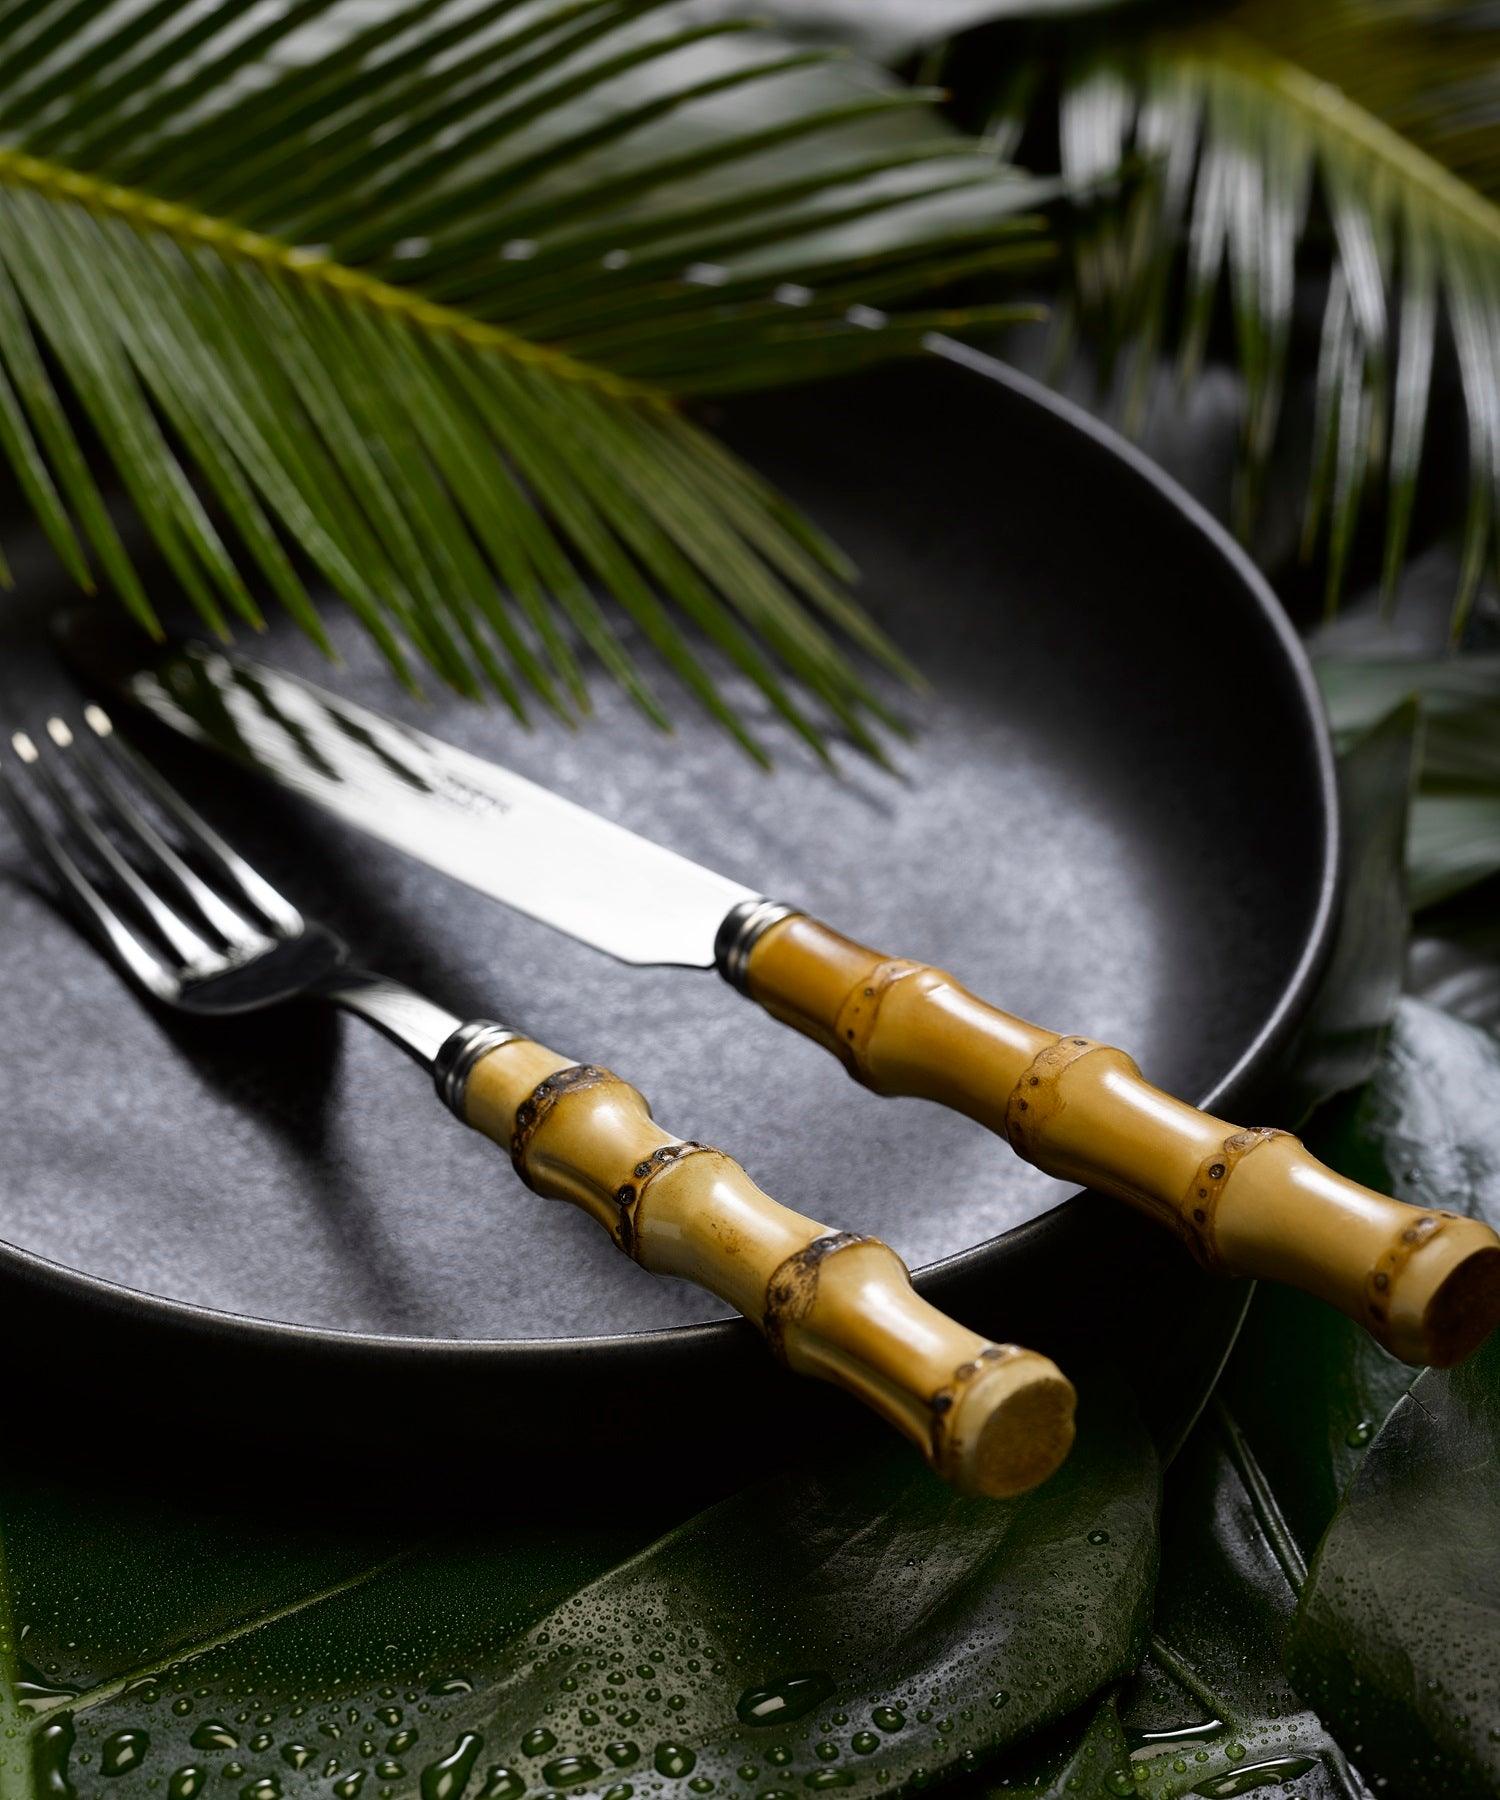 Bamboo Light Cutlery Set of 5: A stylish fork and knife on a plate.